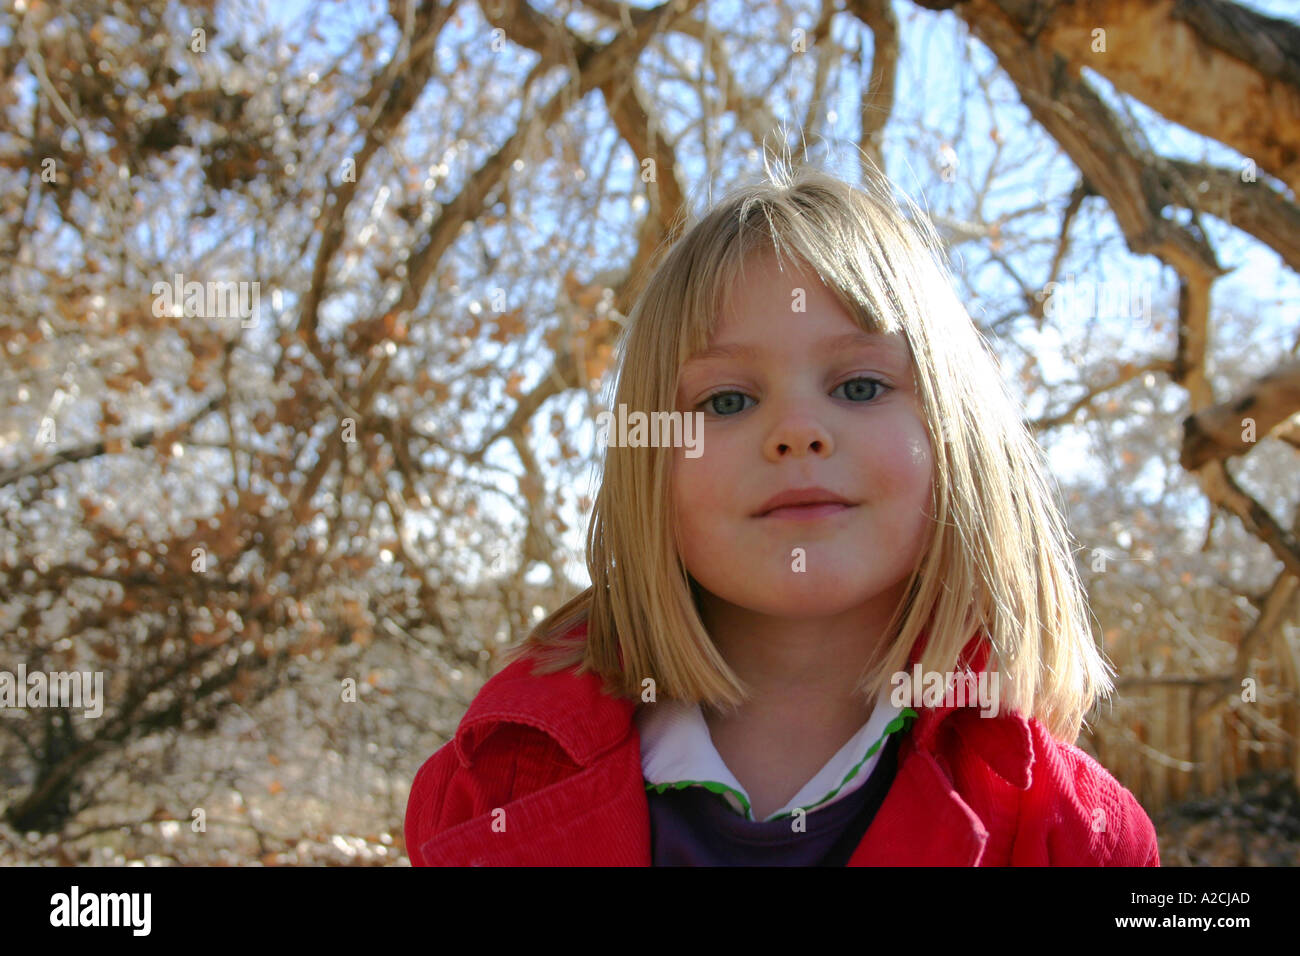 portrait of three year old girl in sunshine Stock Photo